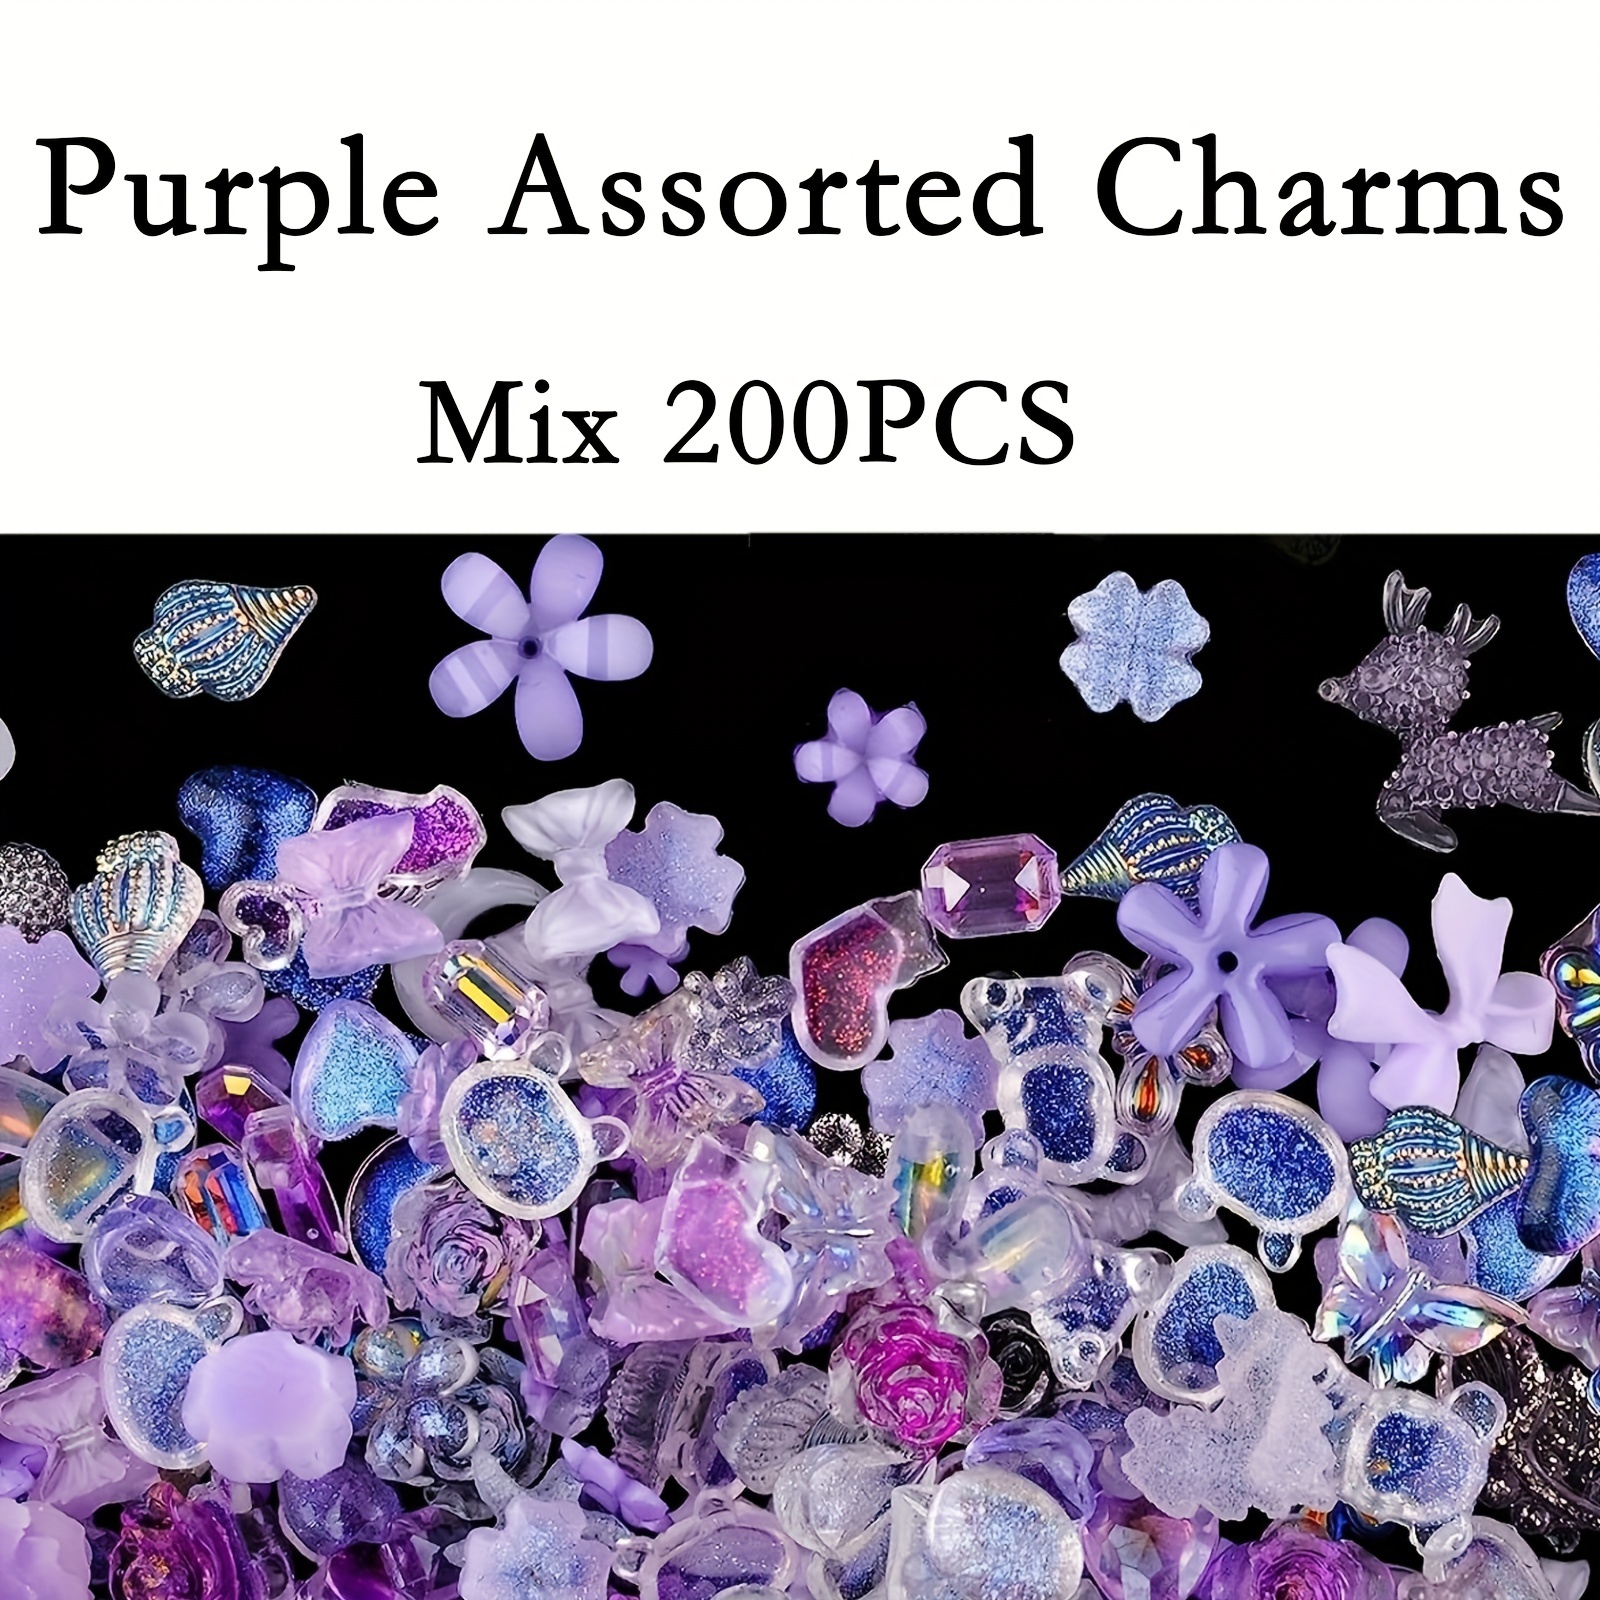 Colorful Assortment of Flower Charms